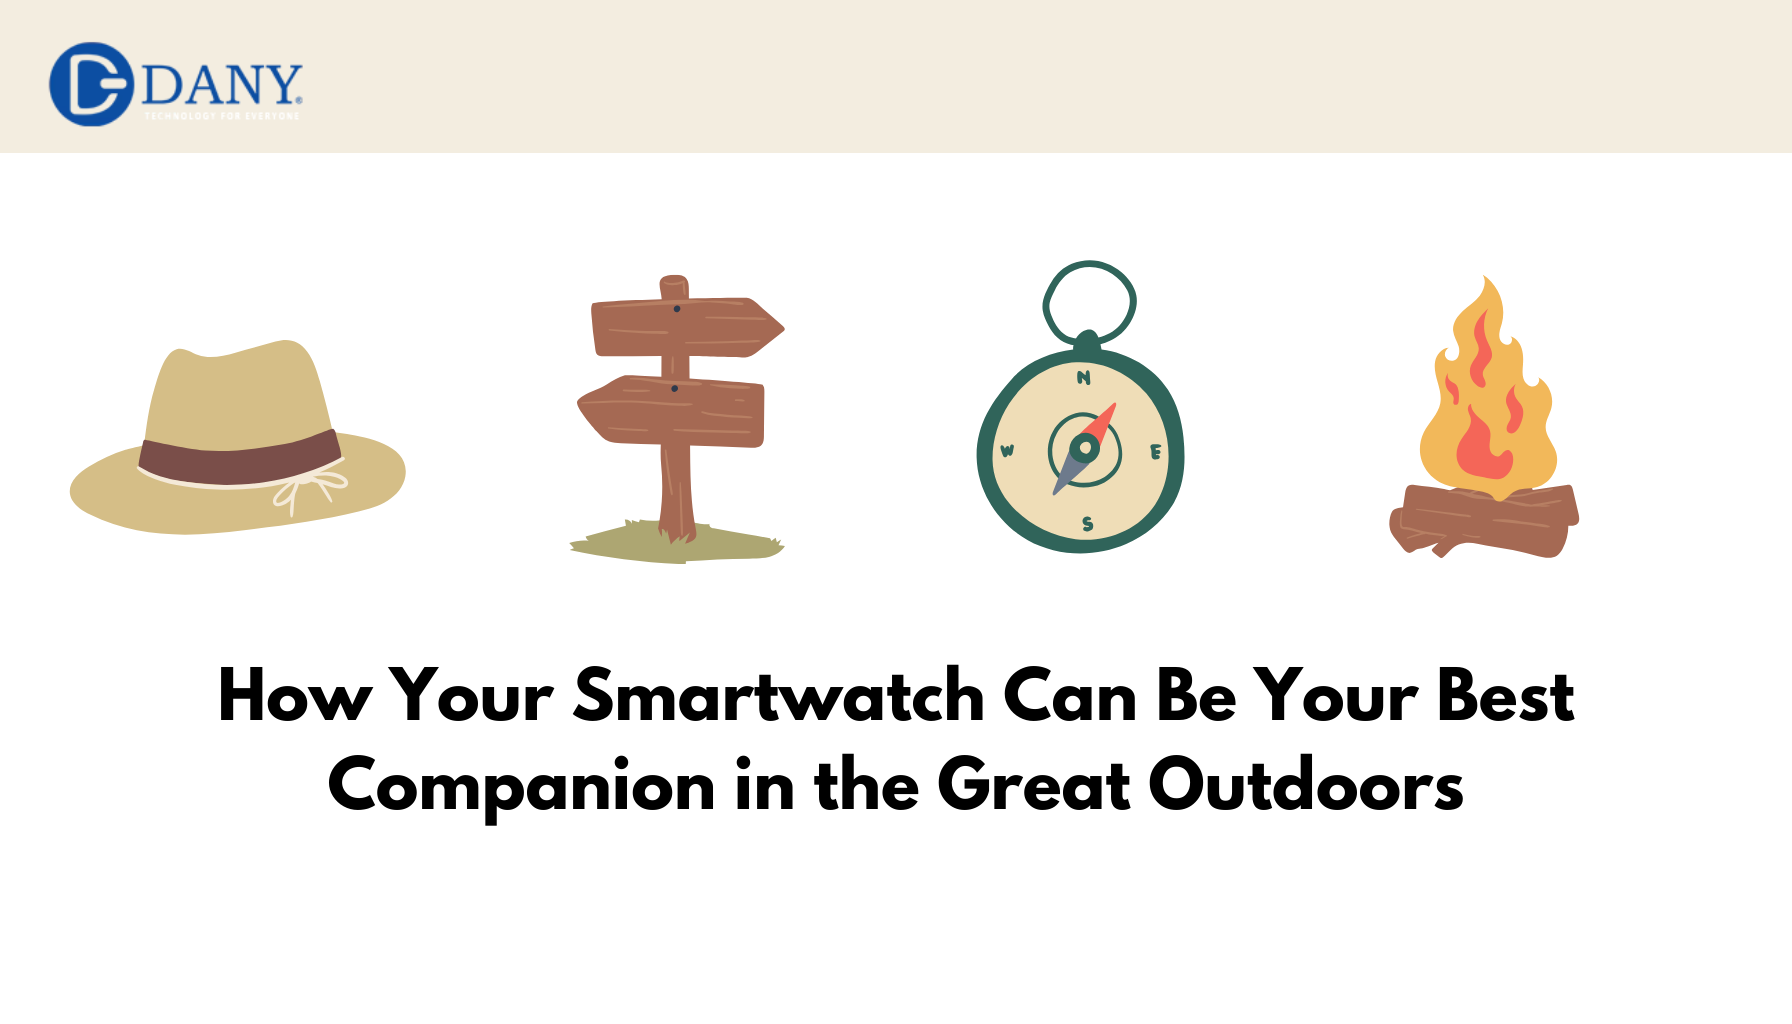 Adventure Awaits: How Your Smartwatch Can Be Your Best Companion in the Great Outdoors